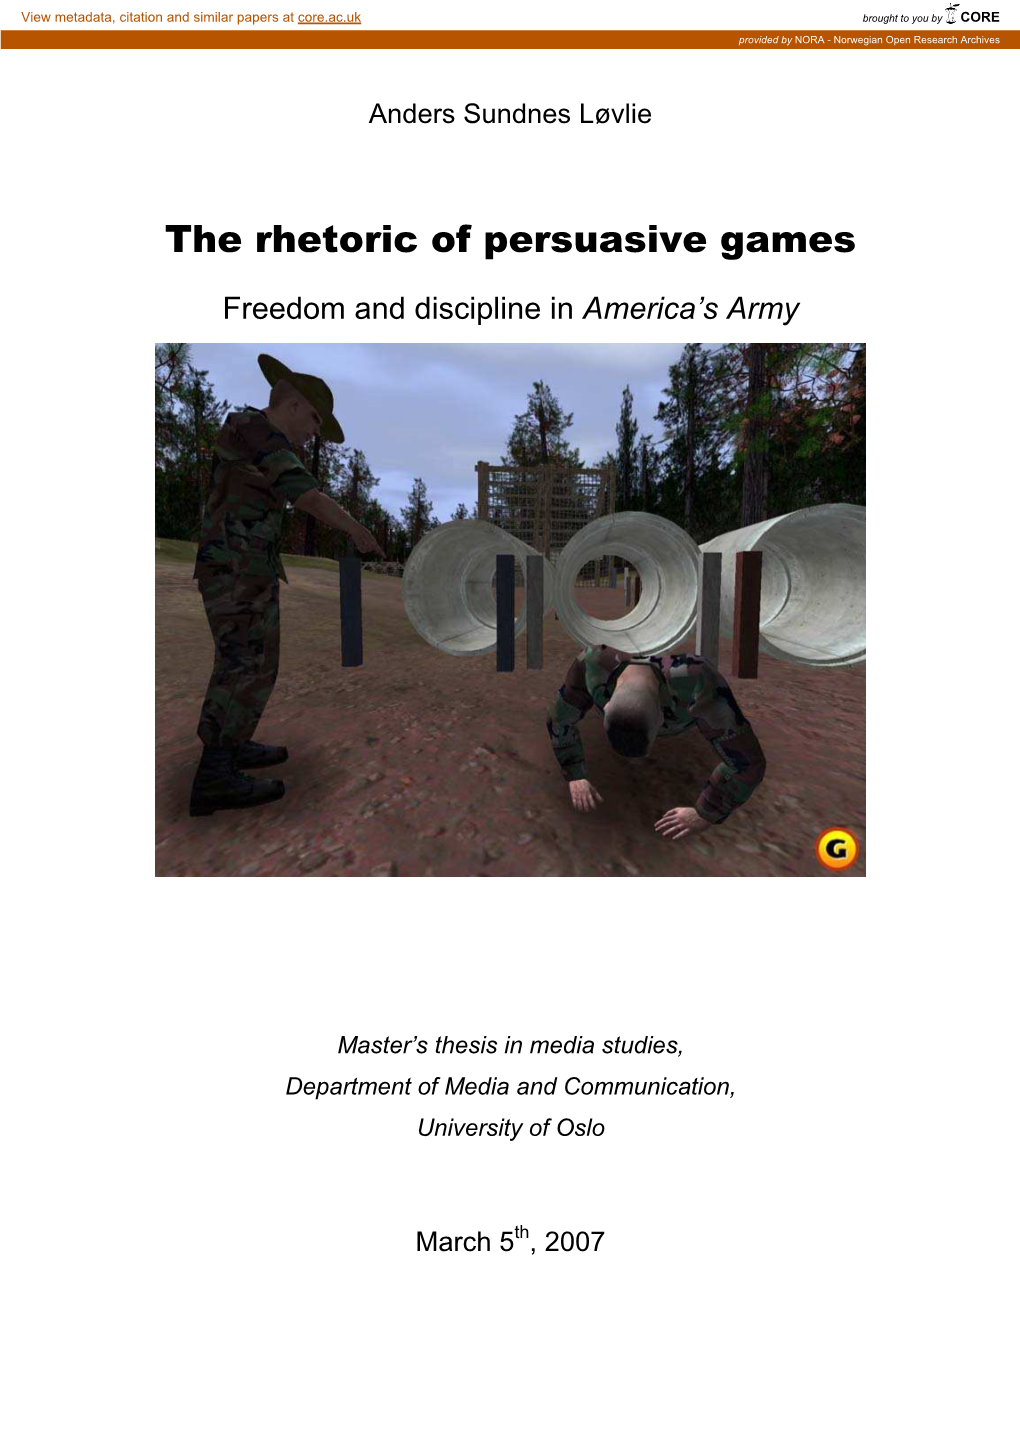 The Rhetoric of Persusasive Games: Freedom and Discipline in America's Army